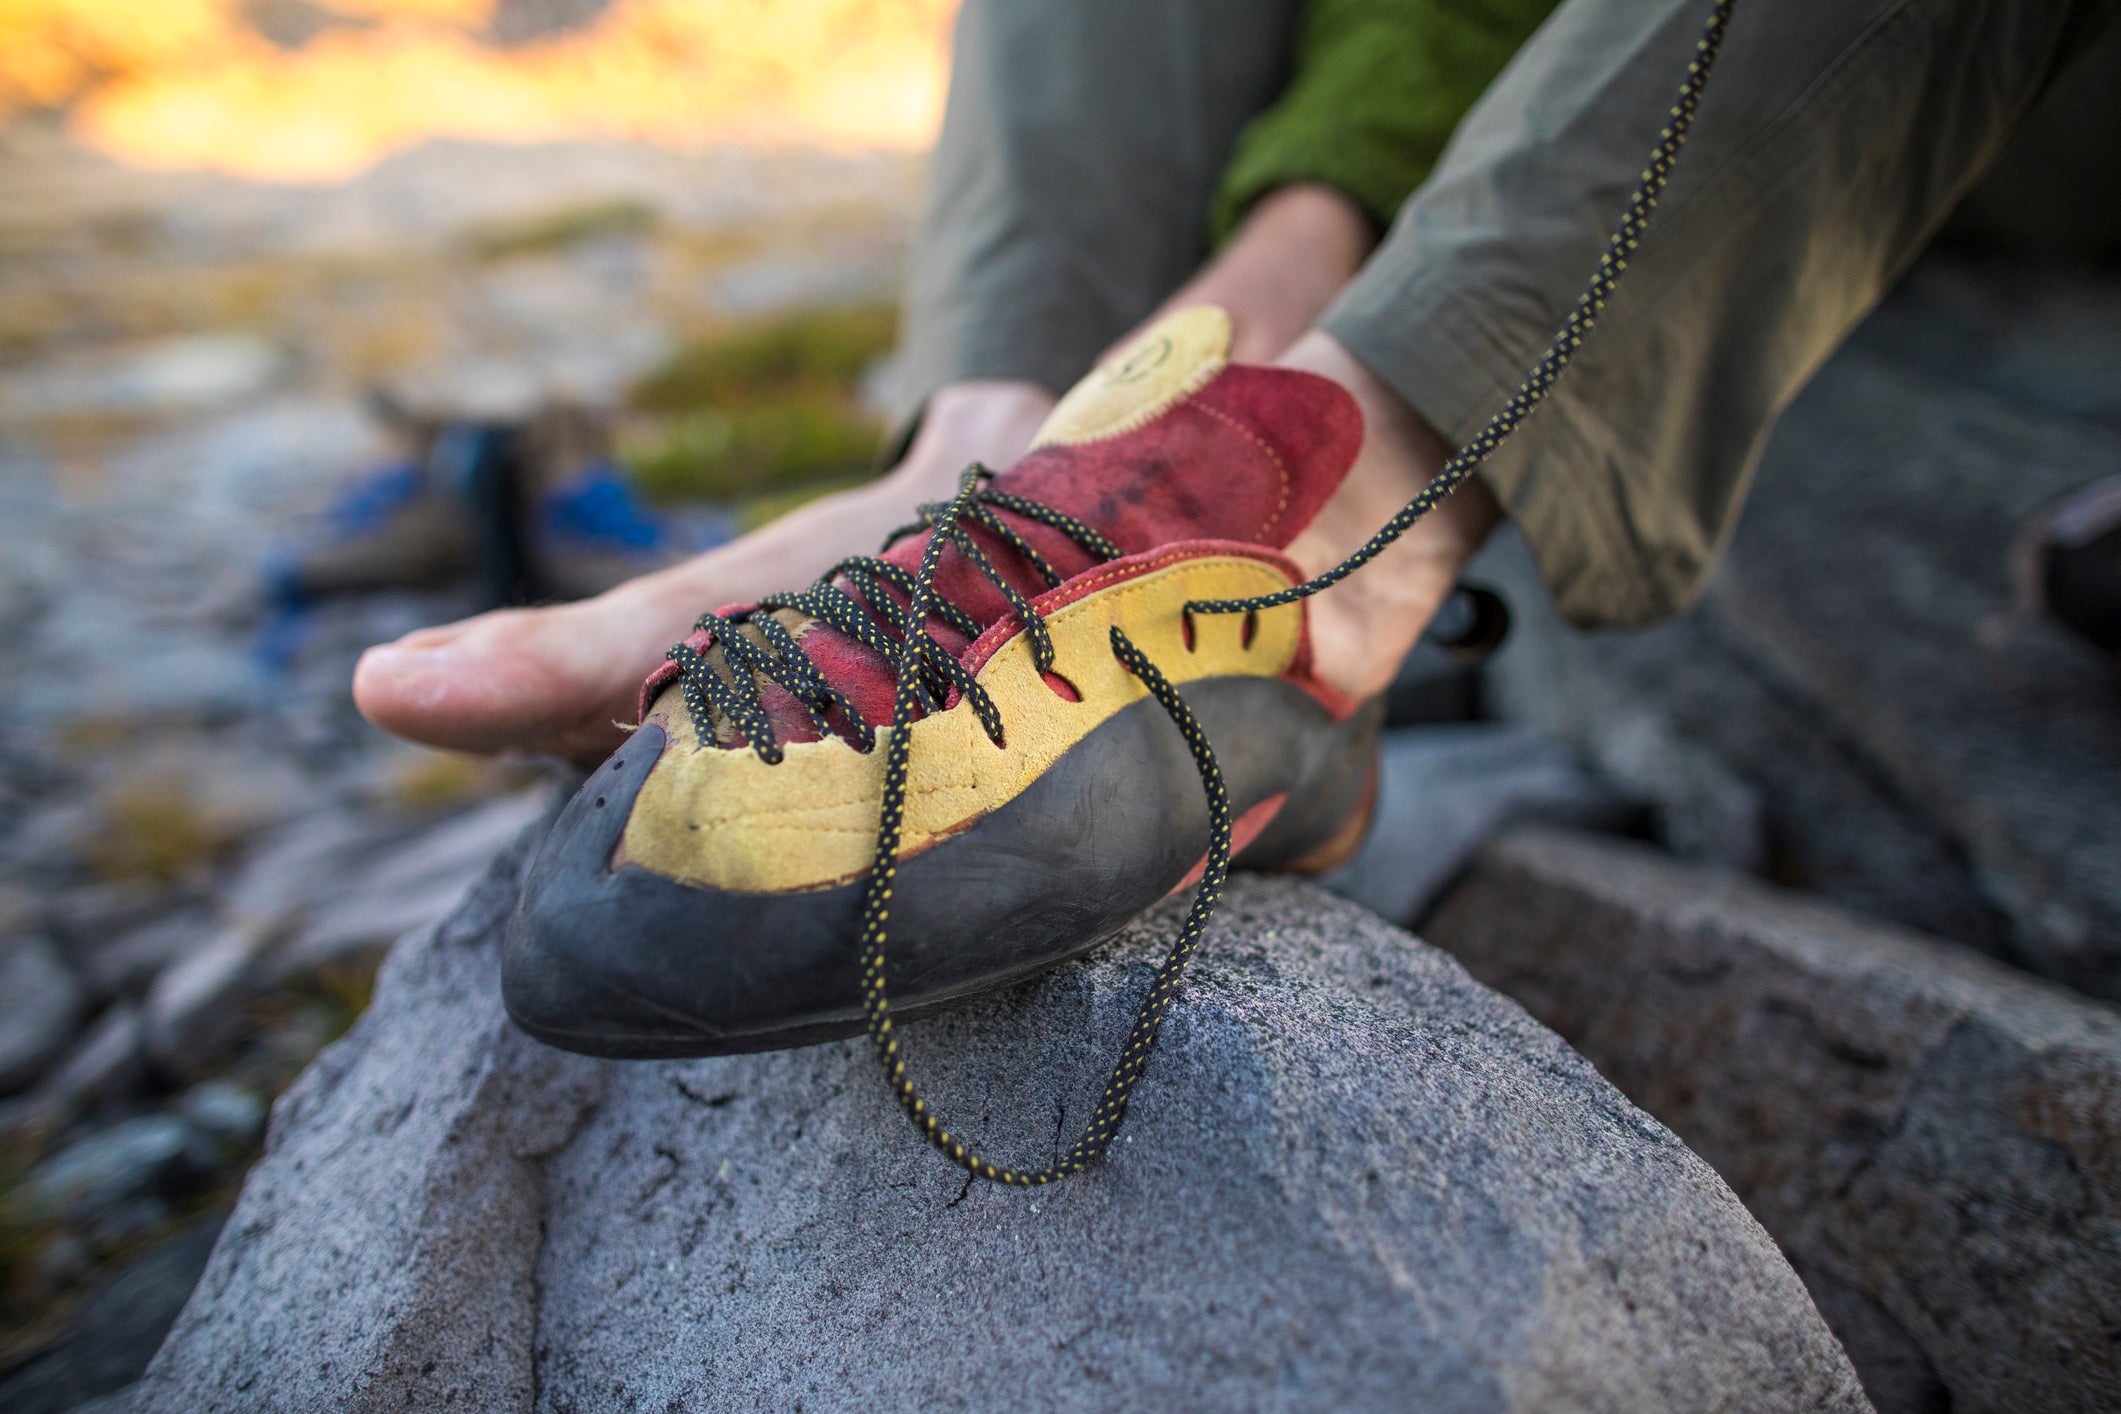 How to choose the right size of climbing shoes - Quora